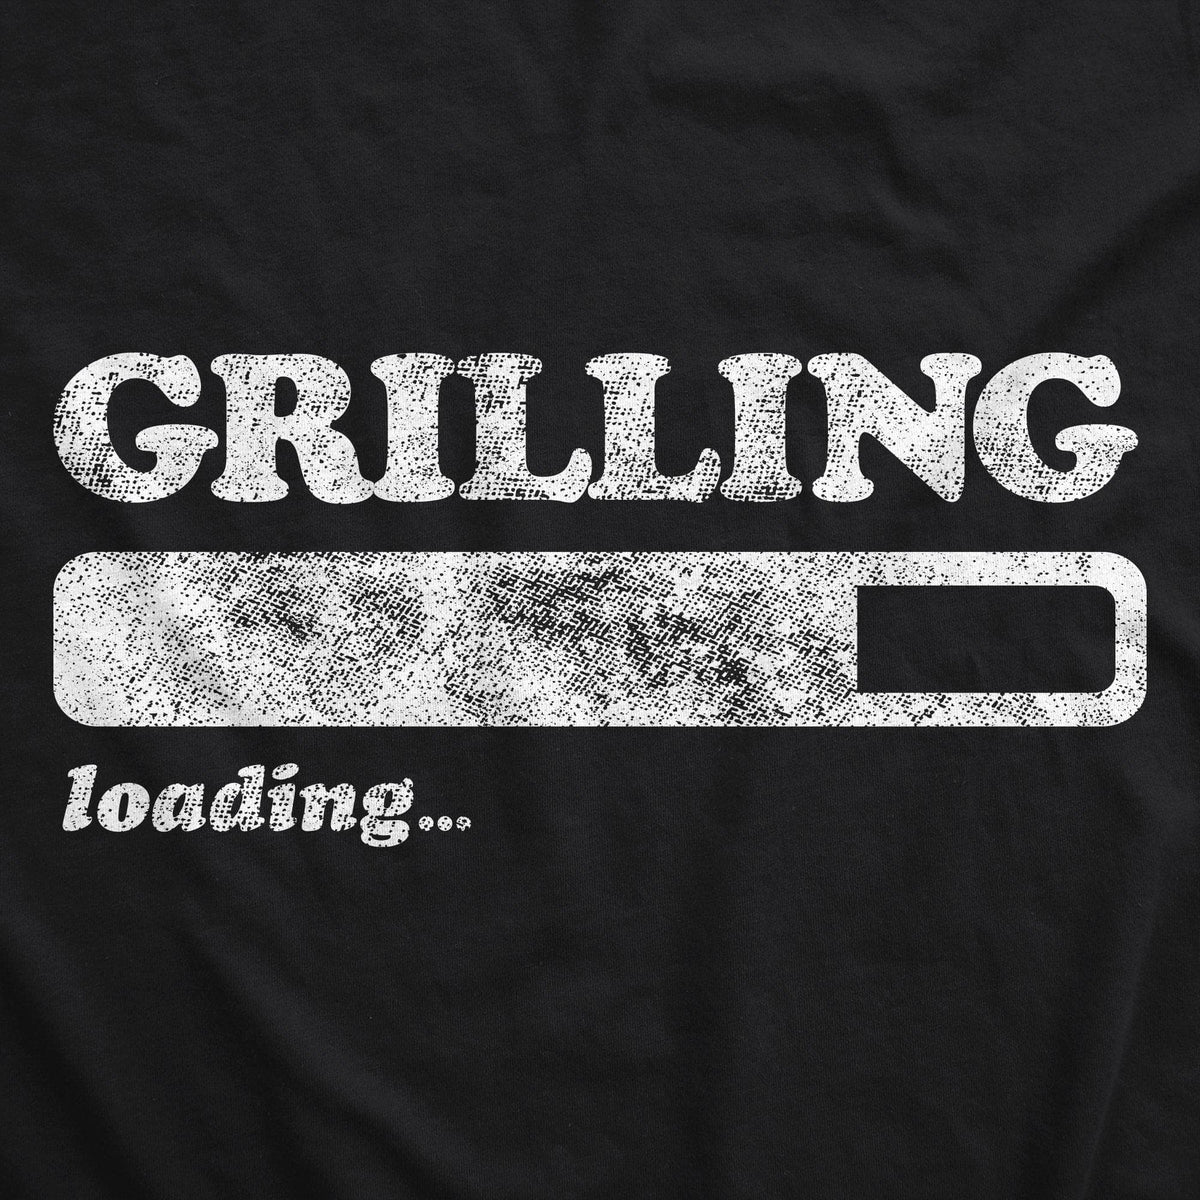 Grilling Loading Cookout Apron - Crazy Dog T-Shirts